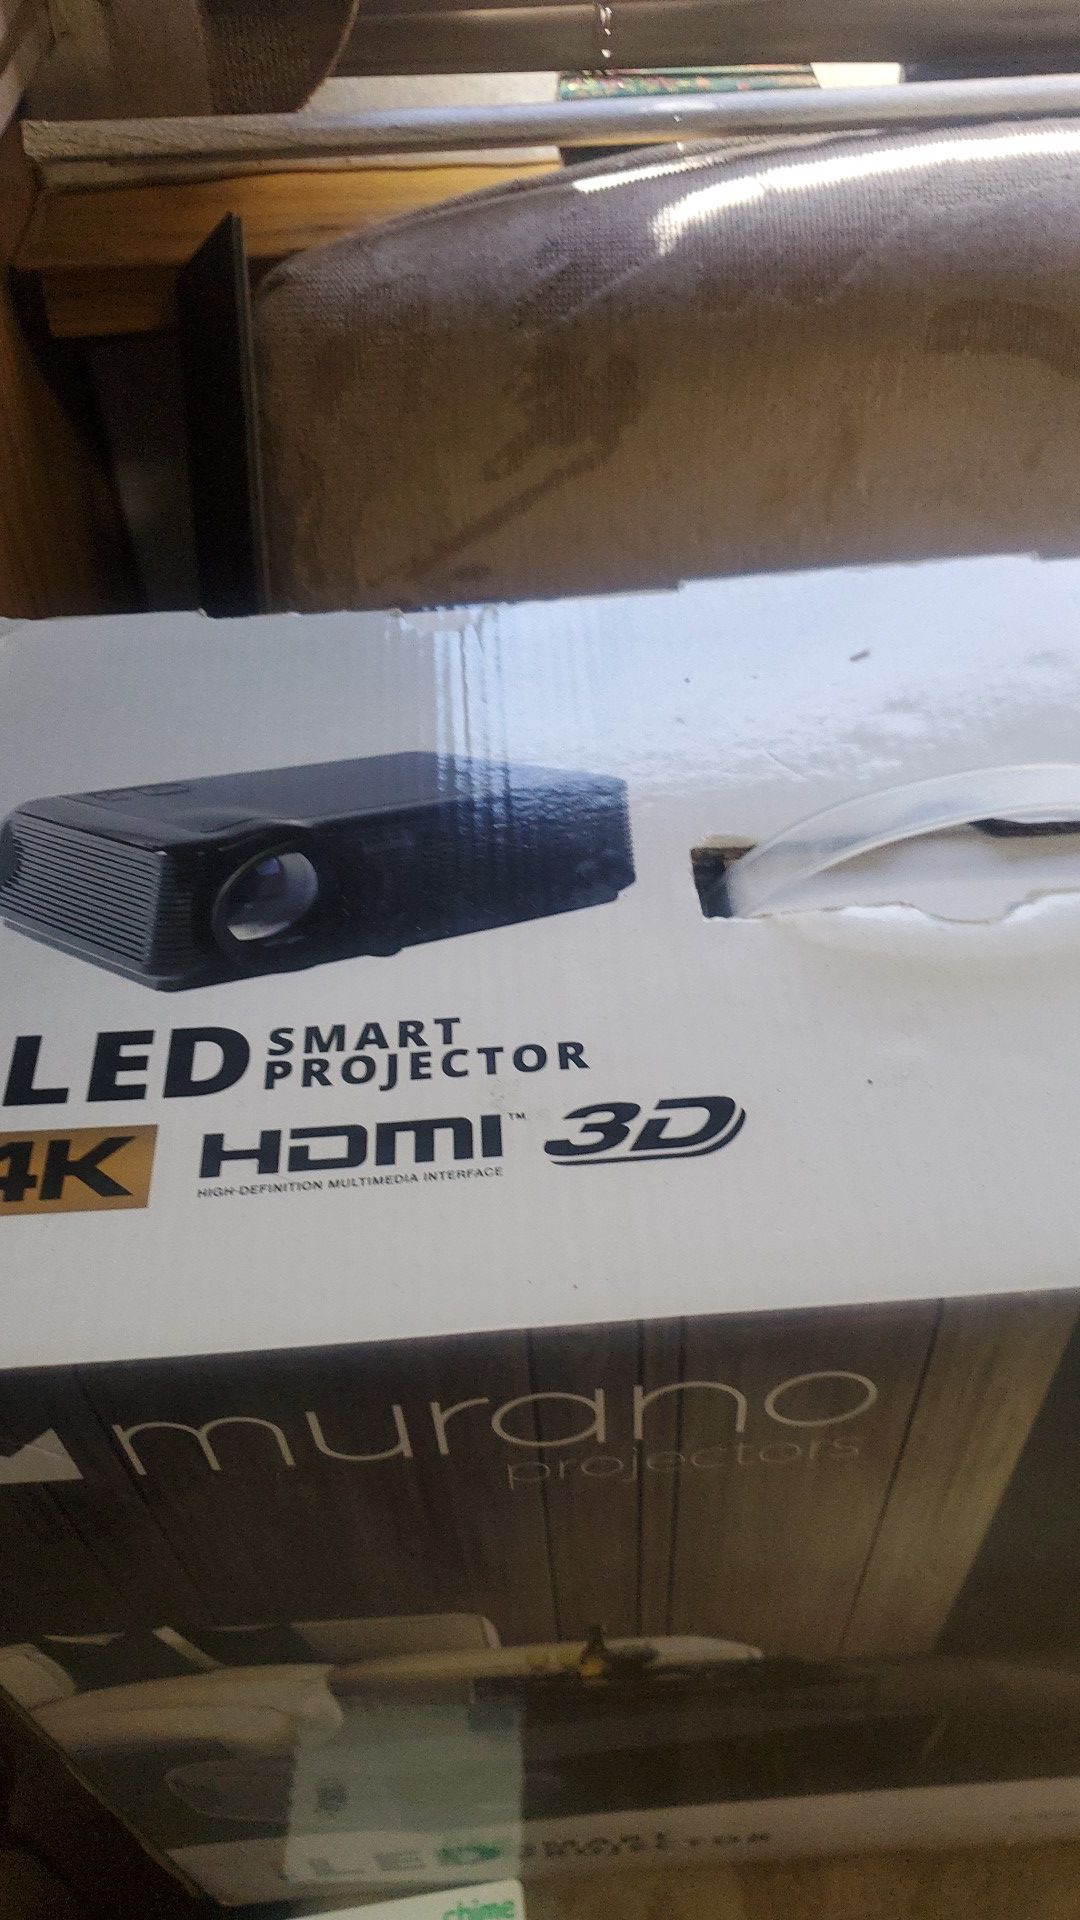 LED smart PROYECTOR HDMI comes with Digital screen